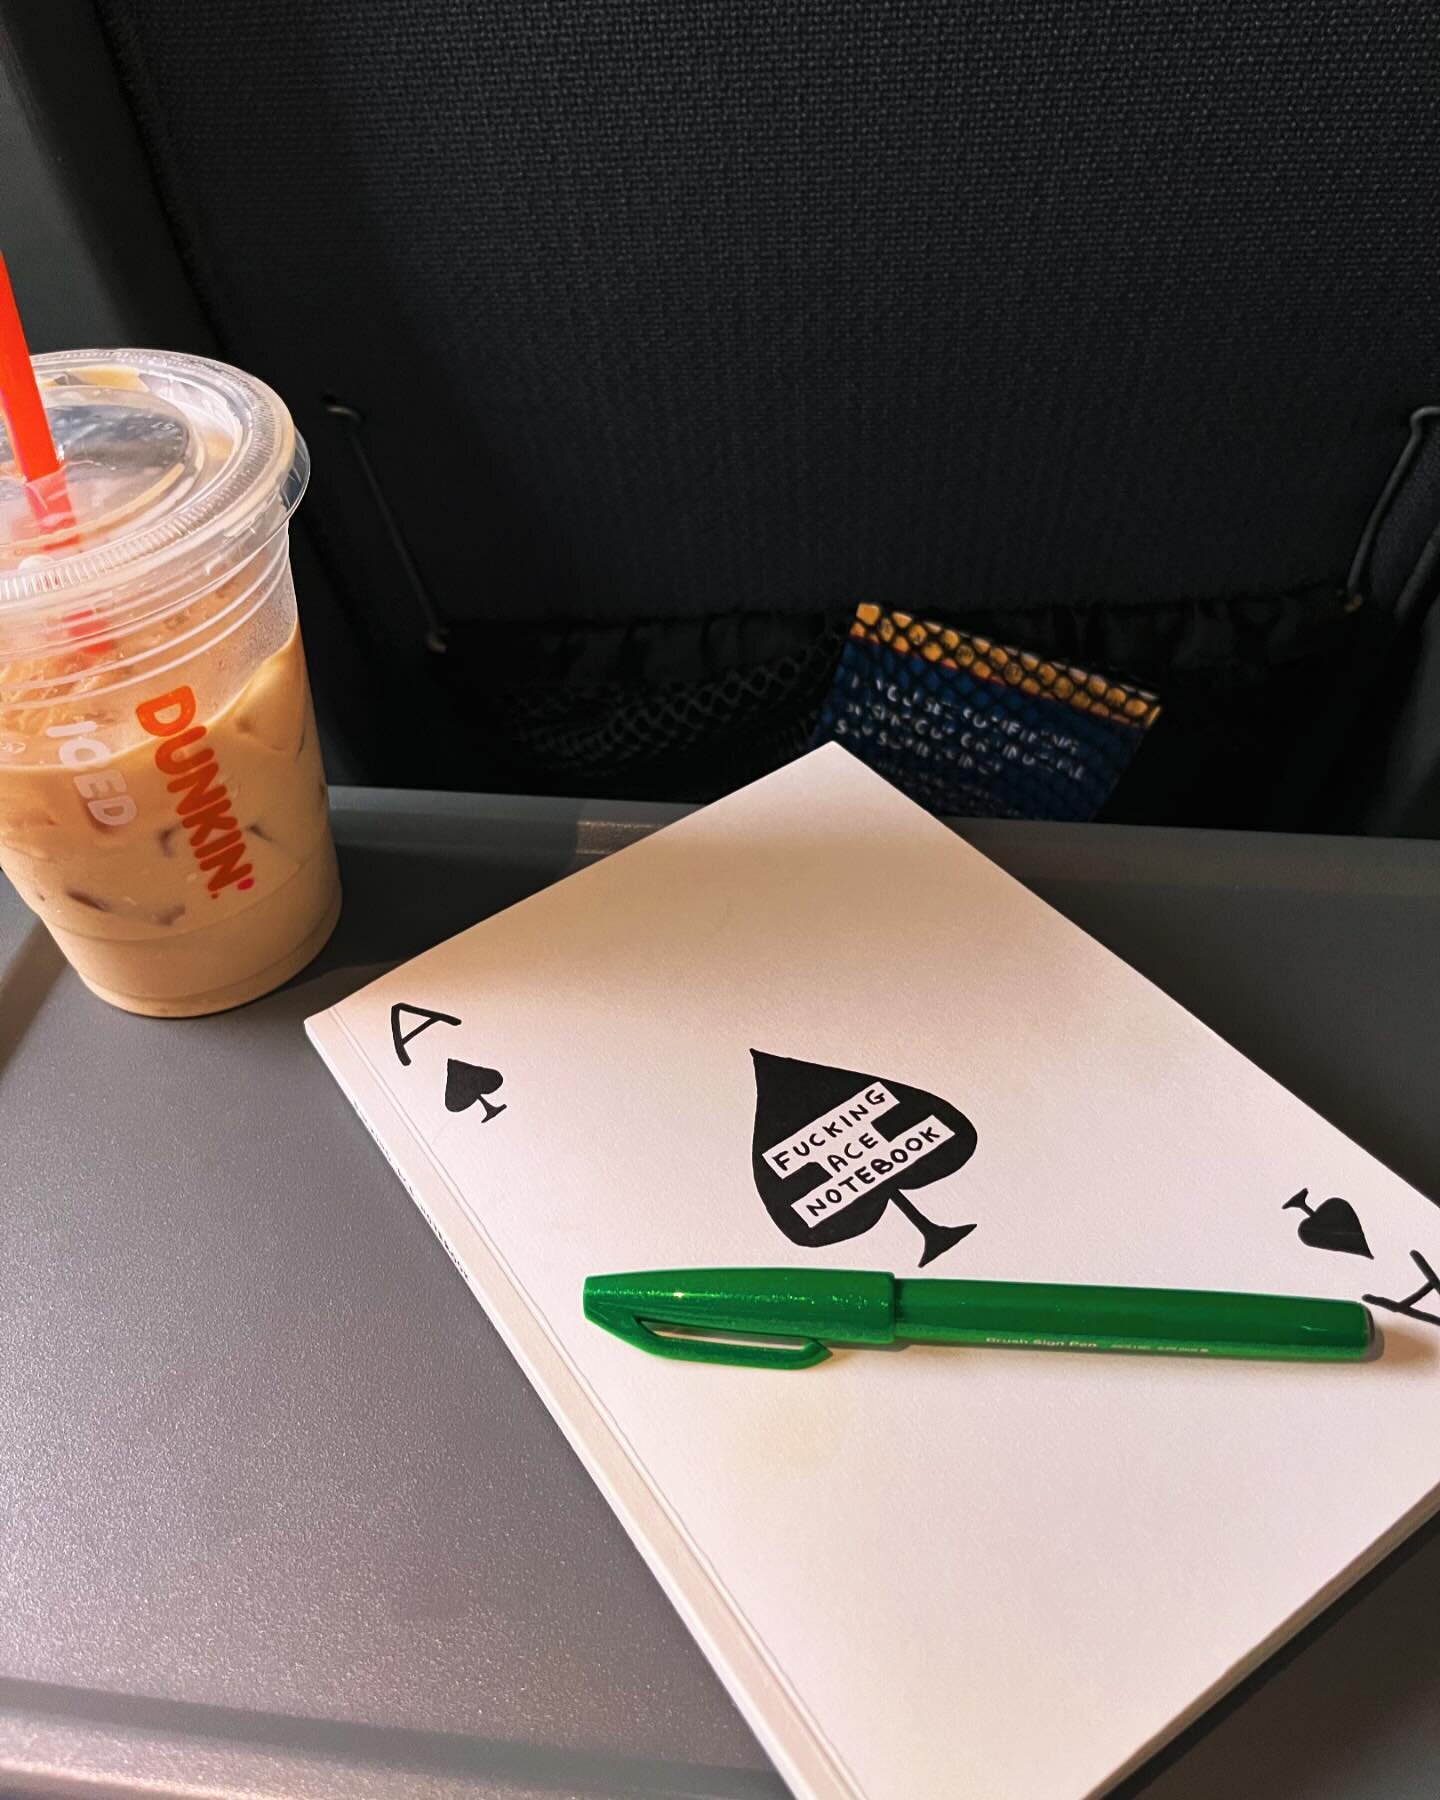 Three cheers for the Red Cap who said &ldquo;yeah, you got time for a quick Dunkin&rdquo; and then made sure I made my train. My fave place to write or edit is on the train 🖋️

#embeditorial #amtrak #amwriting